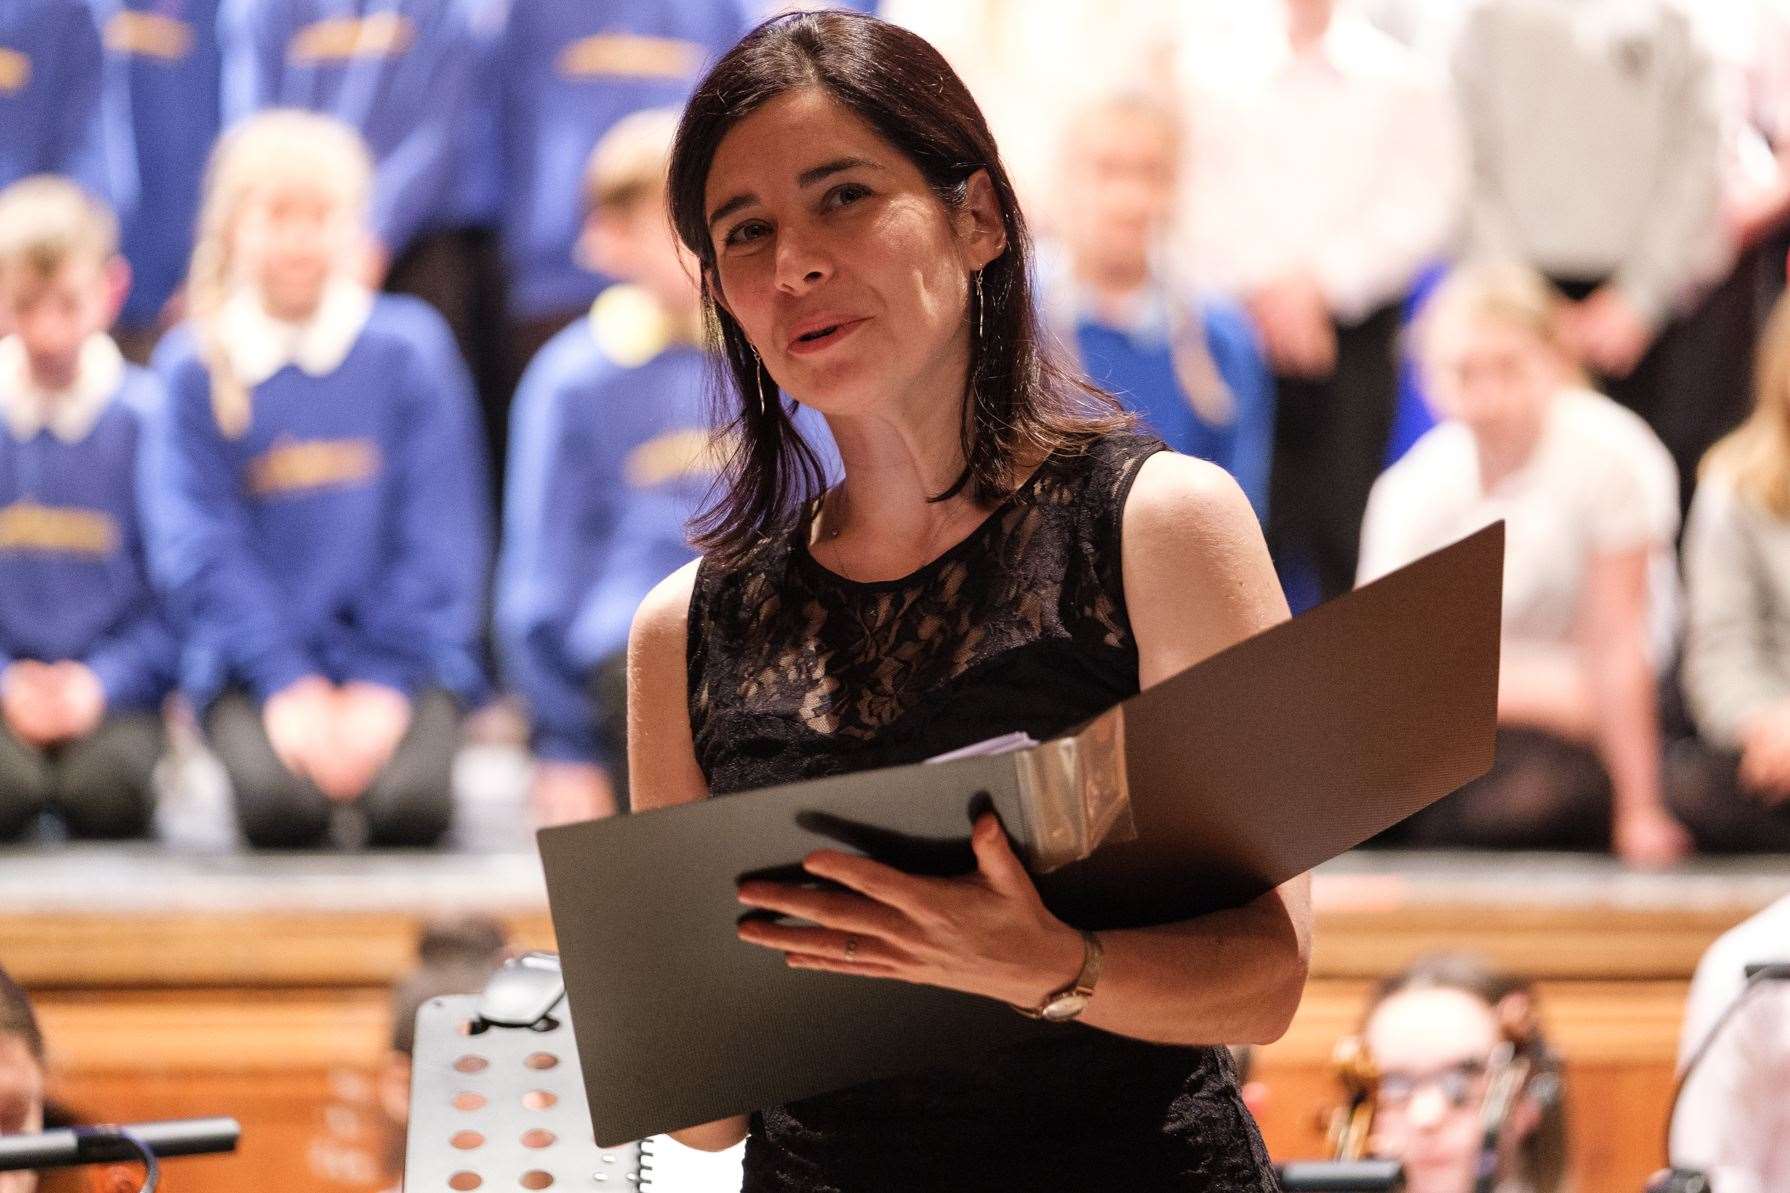 Composer Moira Morrison will lead the Song for Haddo